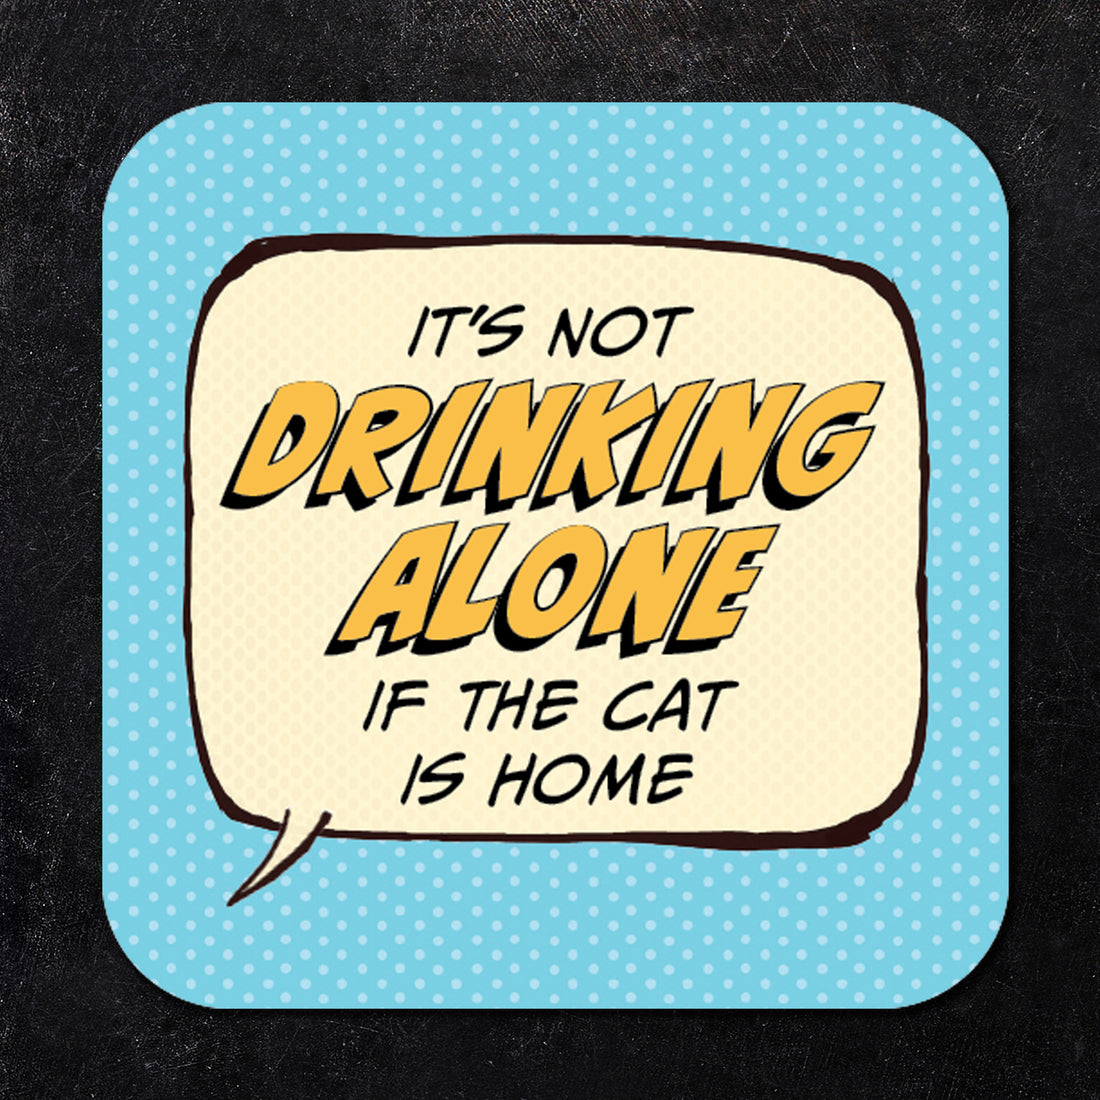 It's not Drinking Alone if the Cat is Home Paper Coaster Set